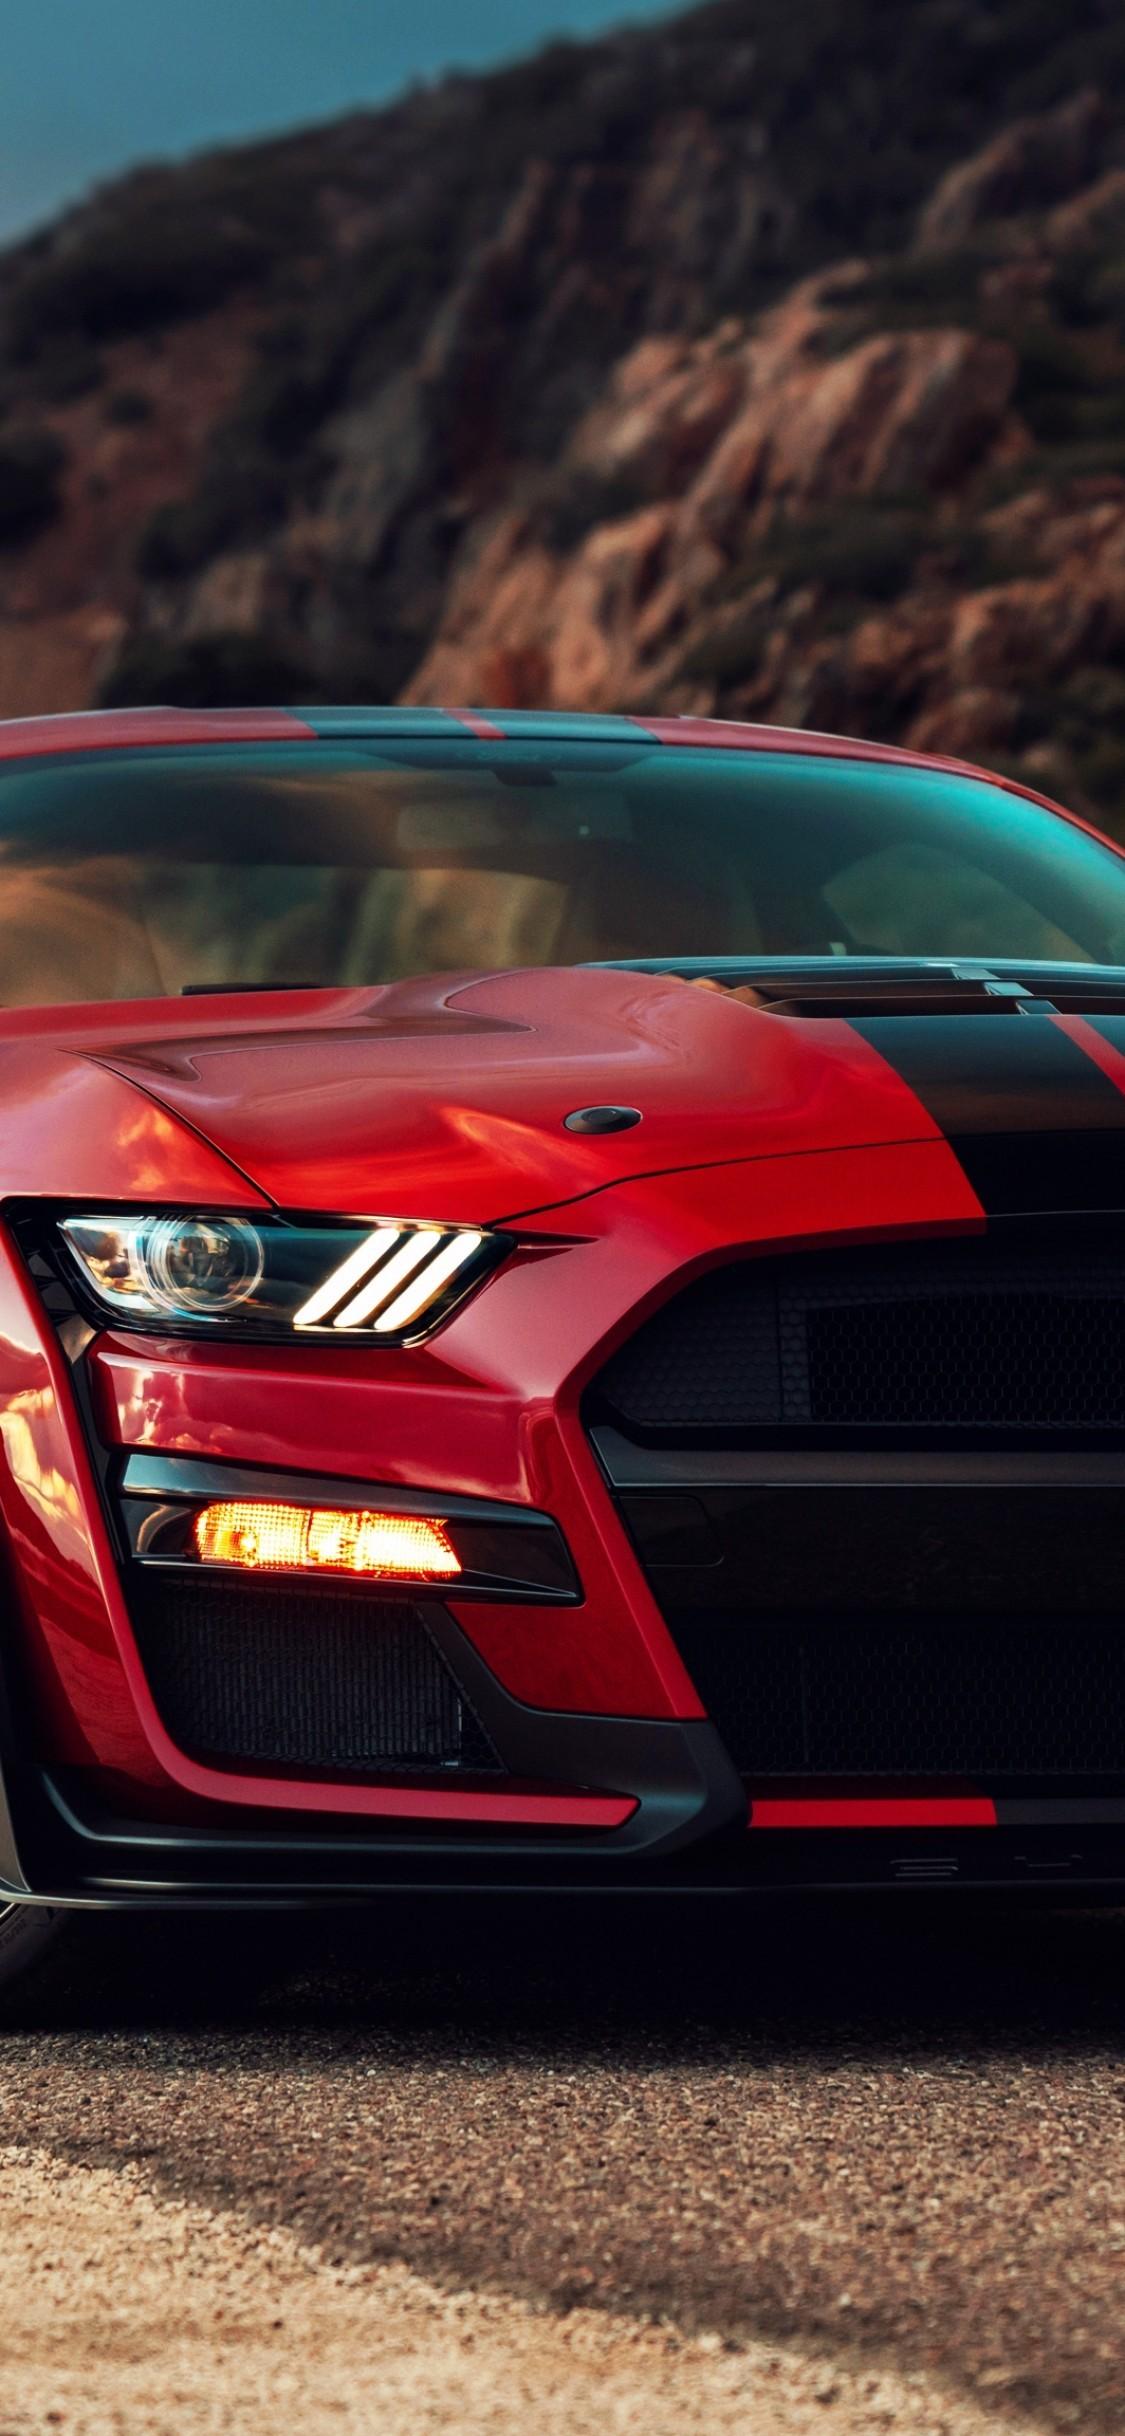 Download 1125x2436 Ford Mustang Shelby Gt500 2020, Red And